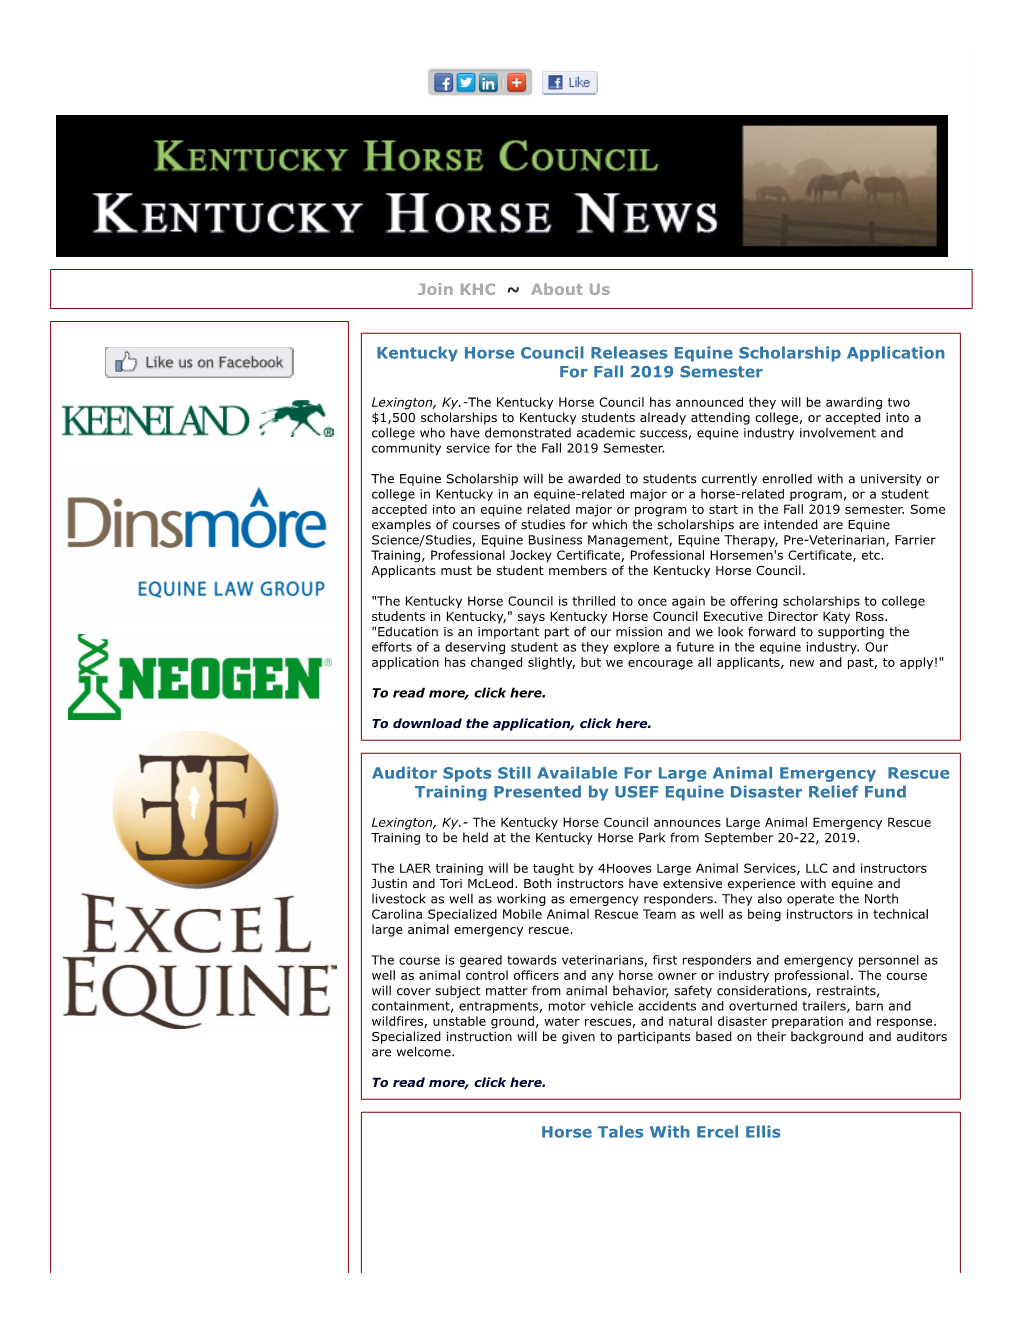 Kentucky Horse Council Releases Equine Scholarship Application for Fall 2019 Semester